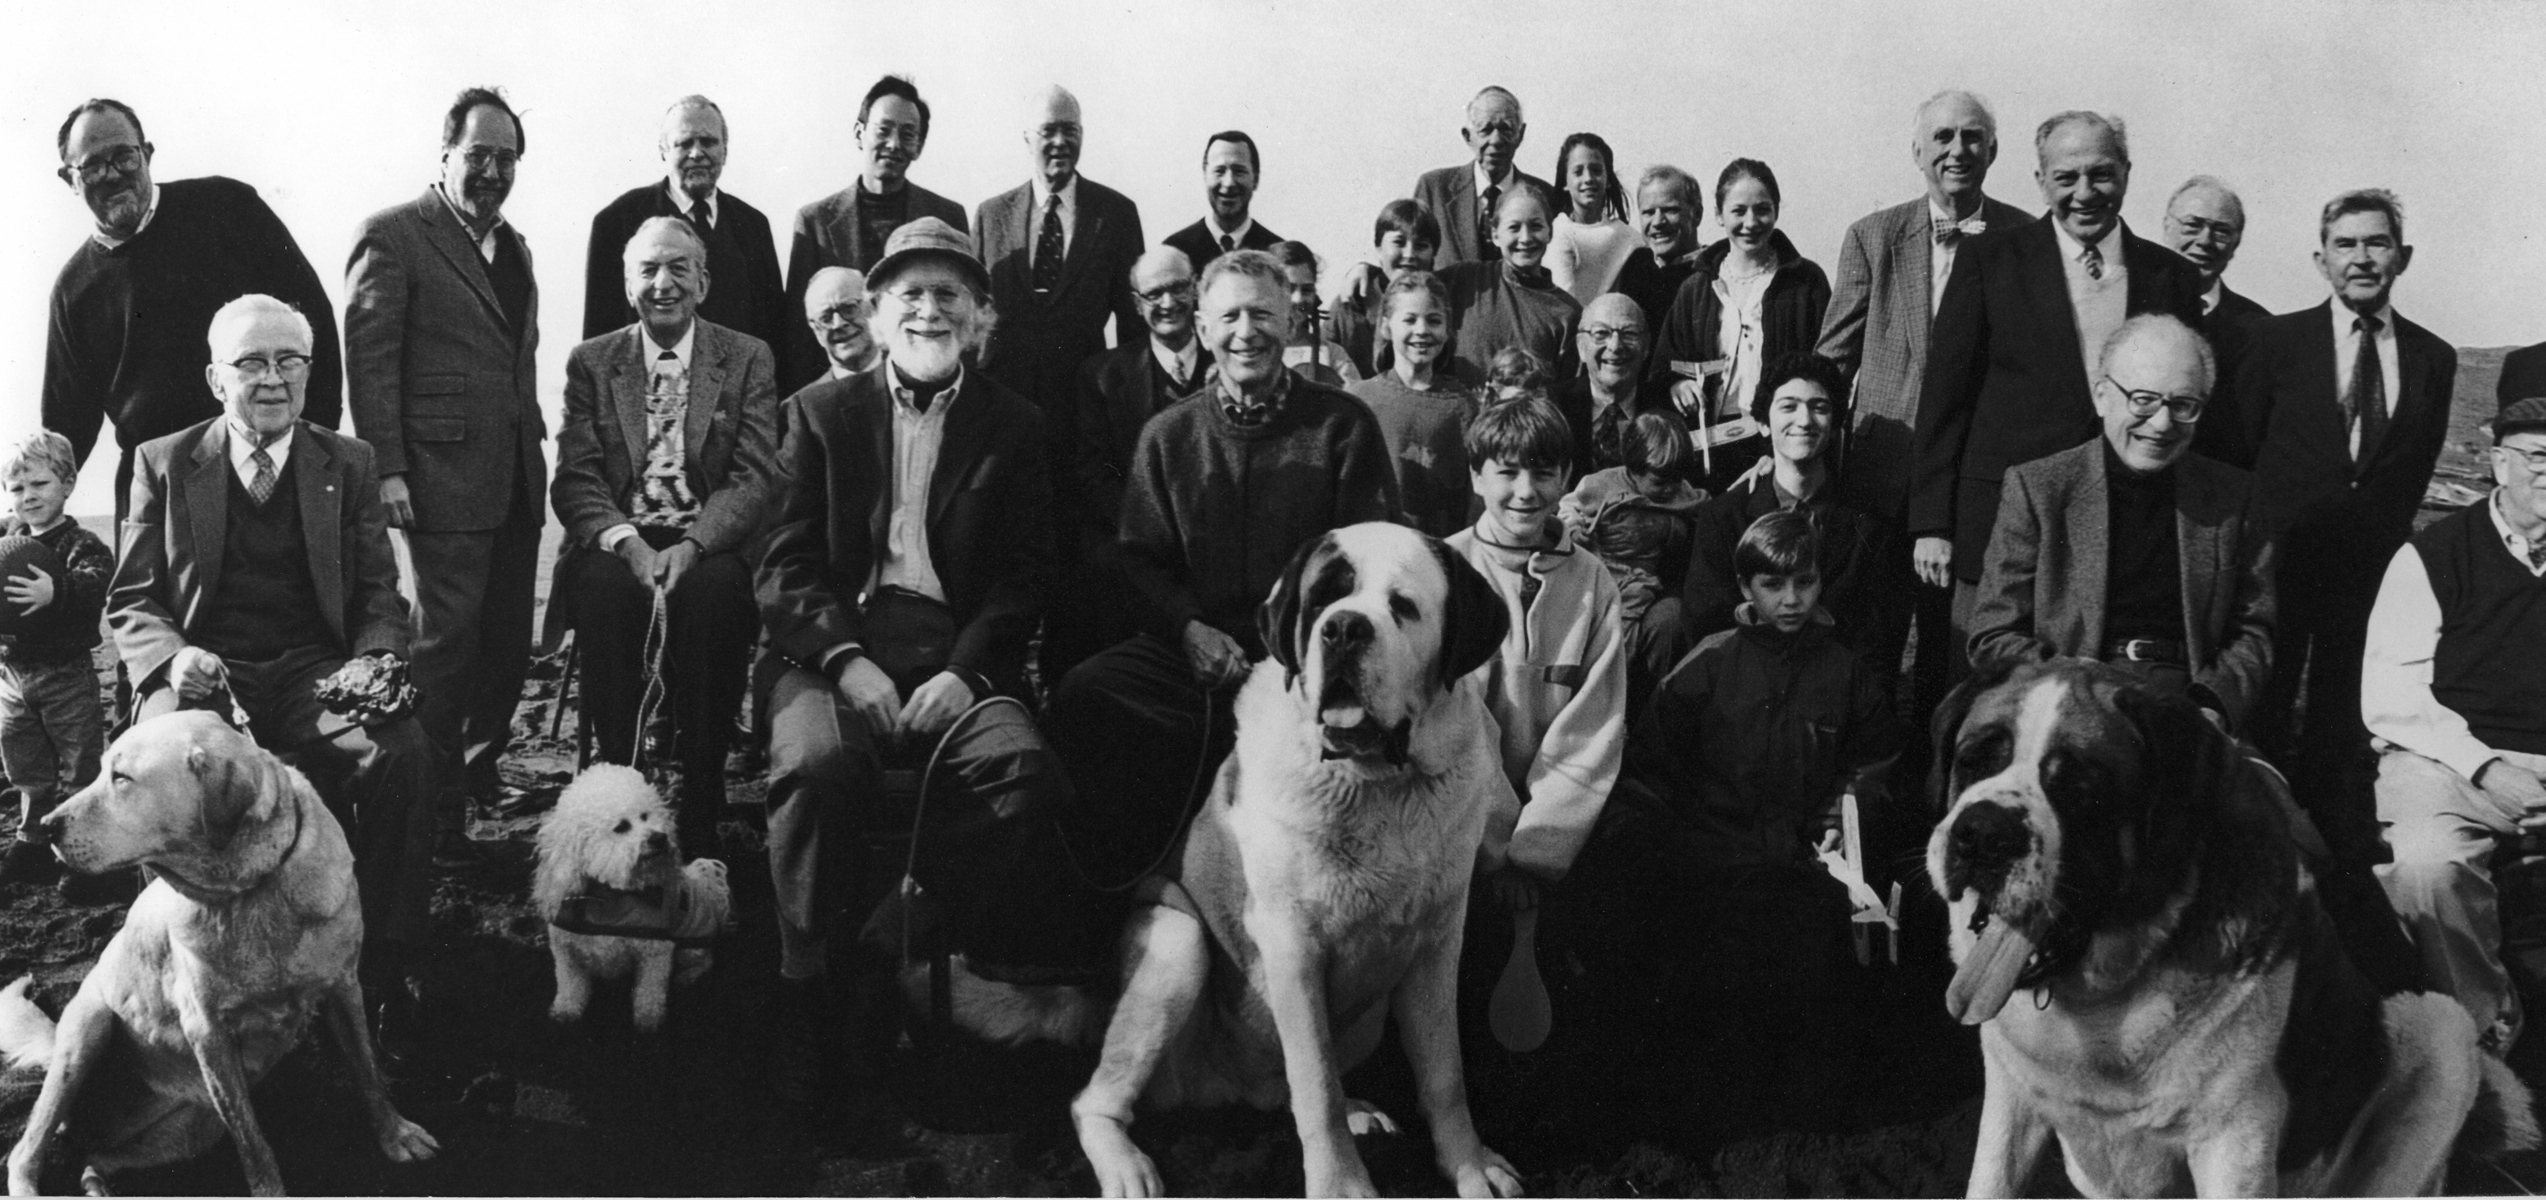 Group photograph of California Nobel Prize winners with family members and dogs. Exhibit files, Bishop.